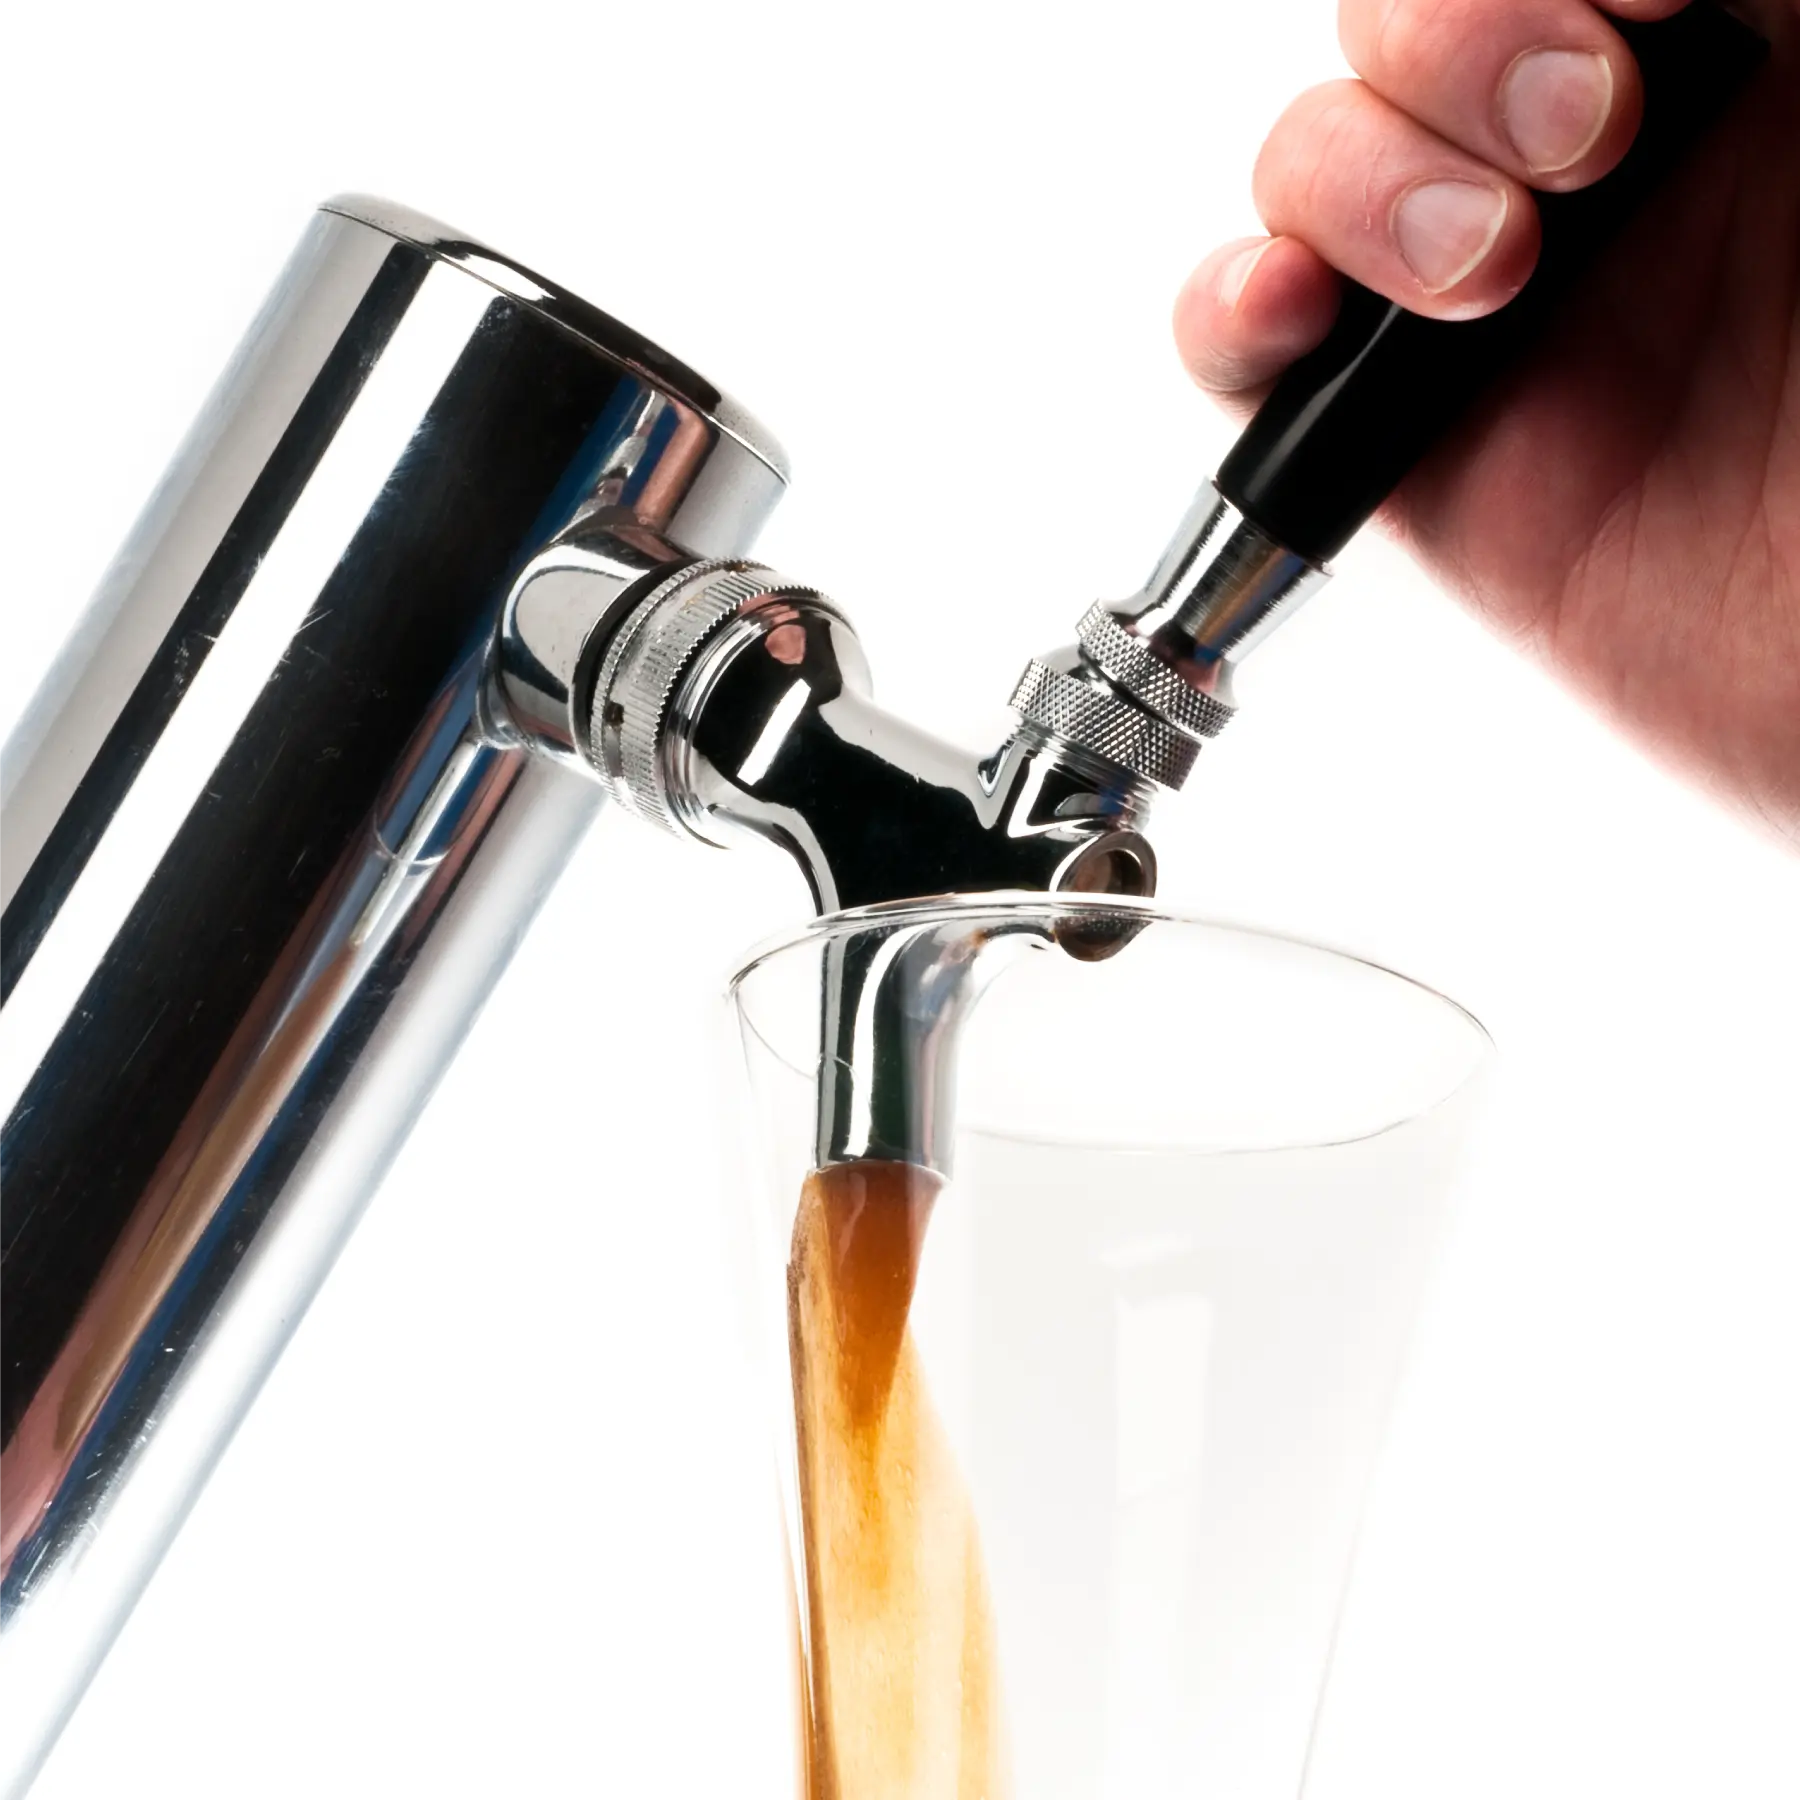 A beer tap pouring into a glass represents our website design and development for Perlick Corporation.